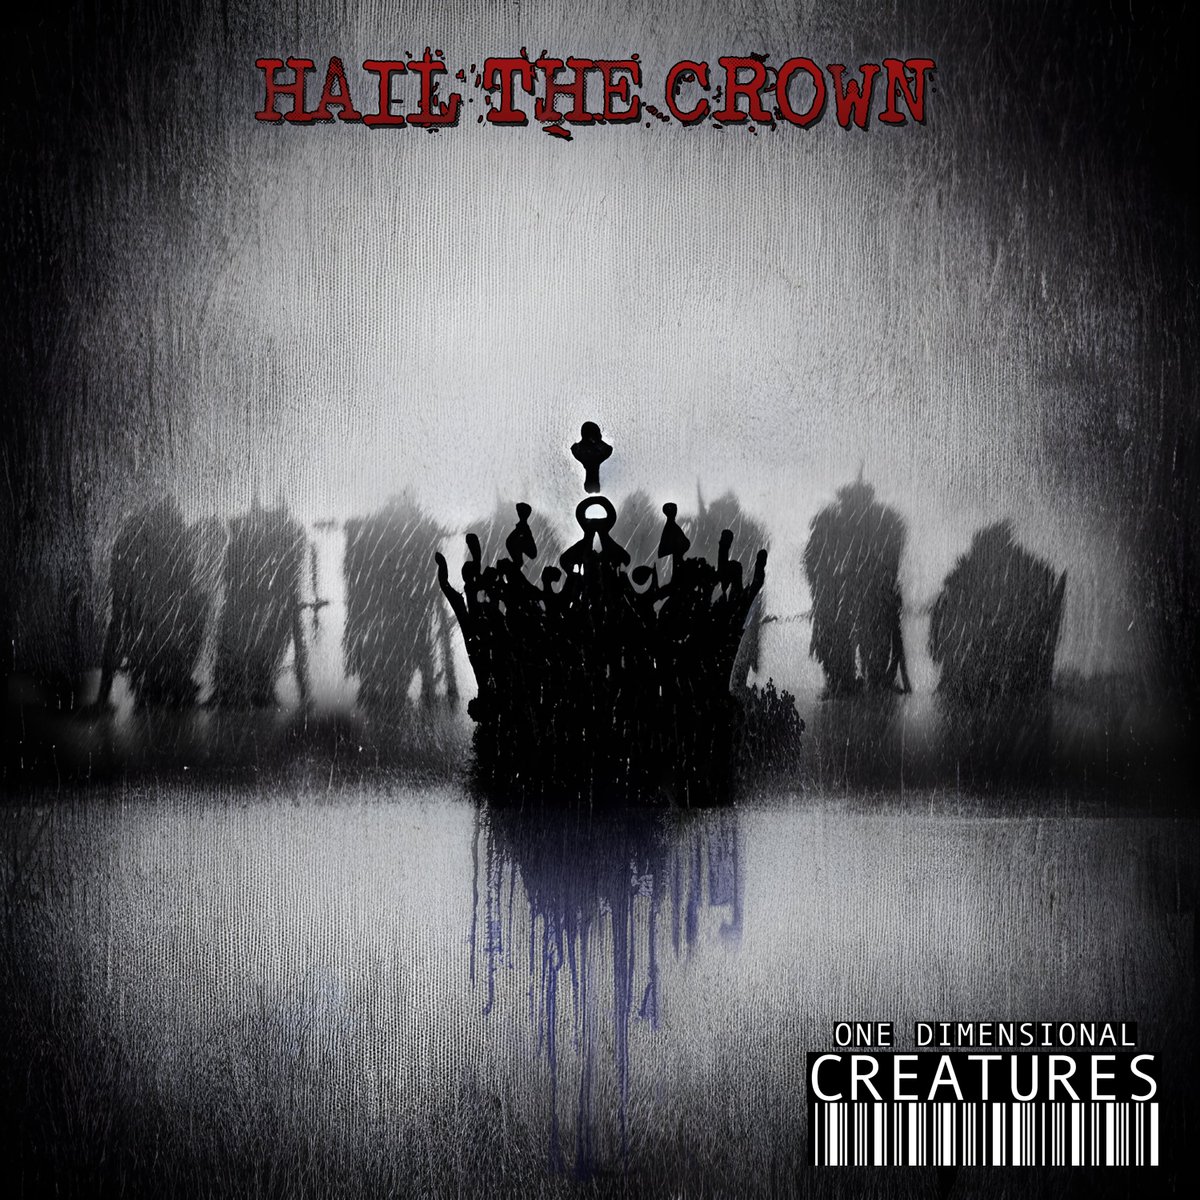 Our new single Hail The Crown has just dropped on streaming and download platform, hope you'll have a listen🙏🤘 #newmusic #newmusicfriday #listen #alternativerock #rock #punk